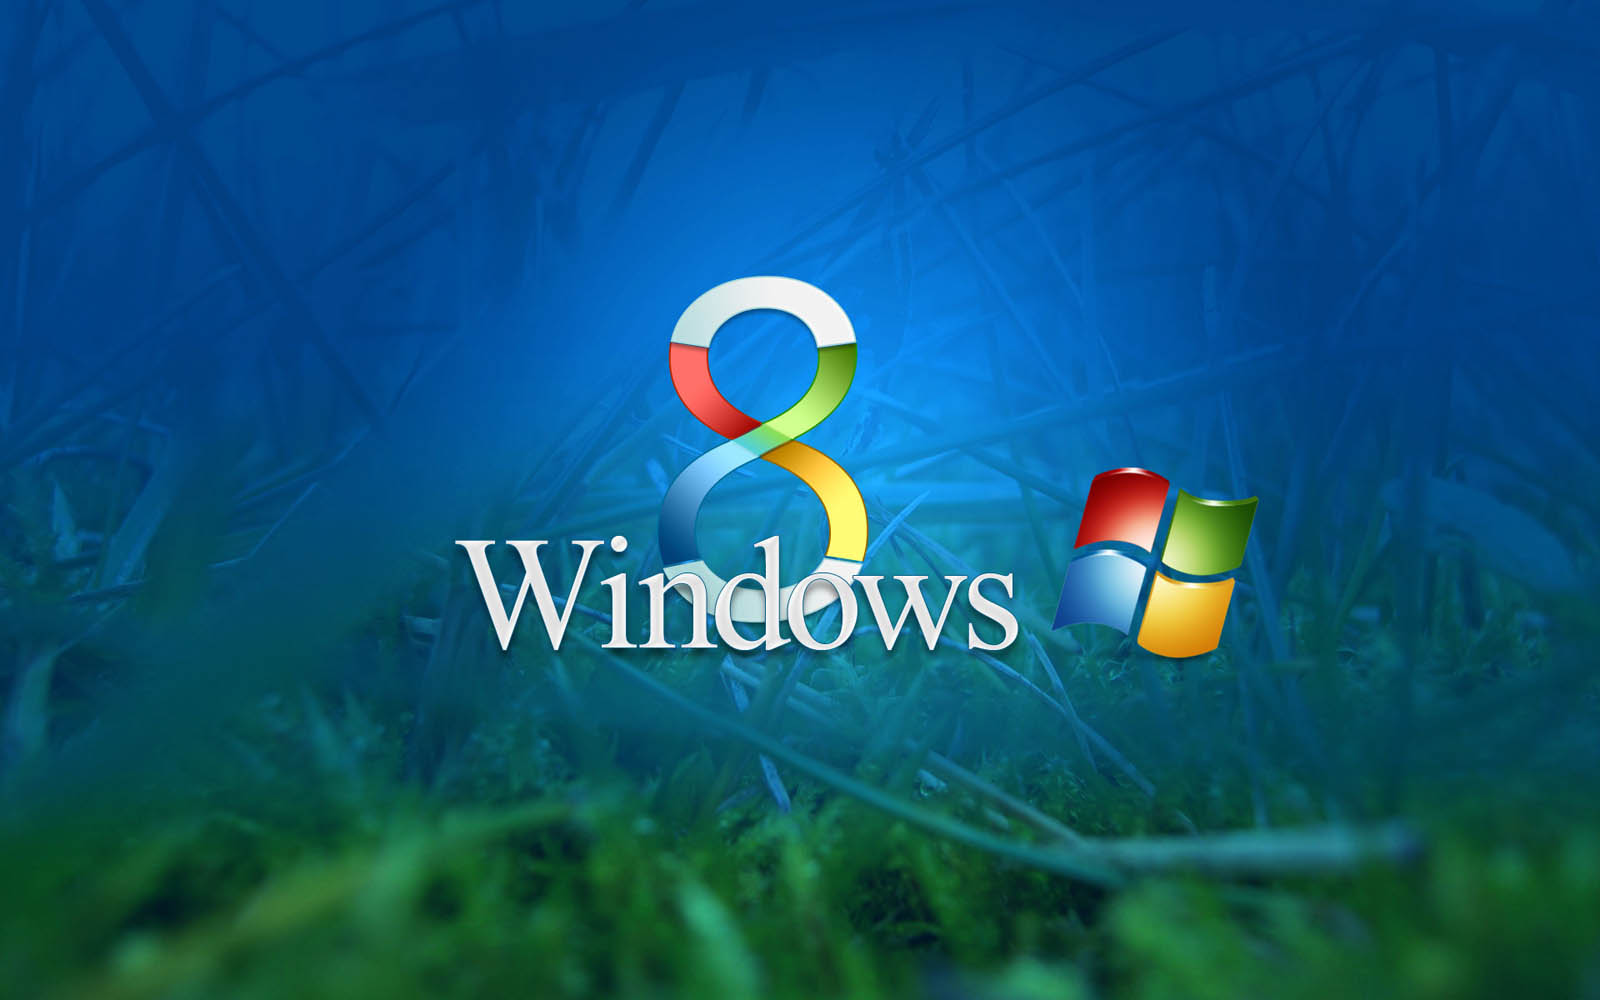 Windows Desktop Wallpaper And Background Image To